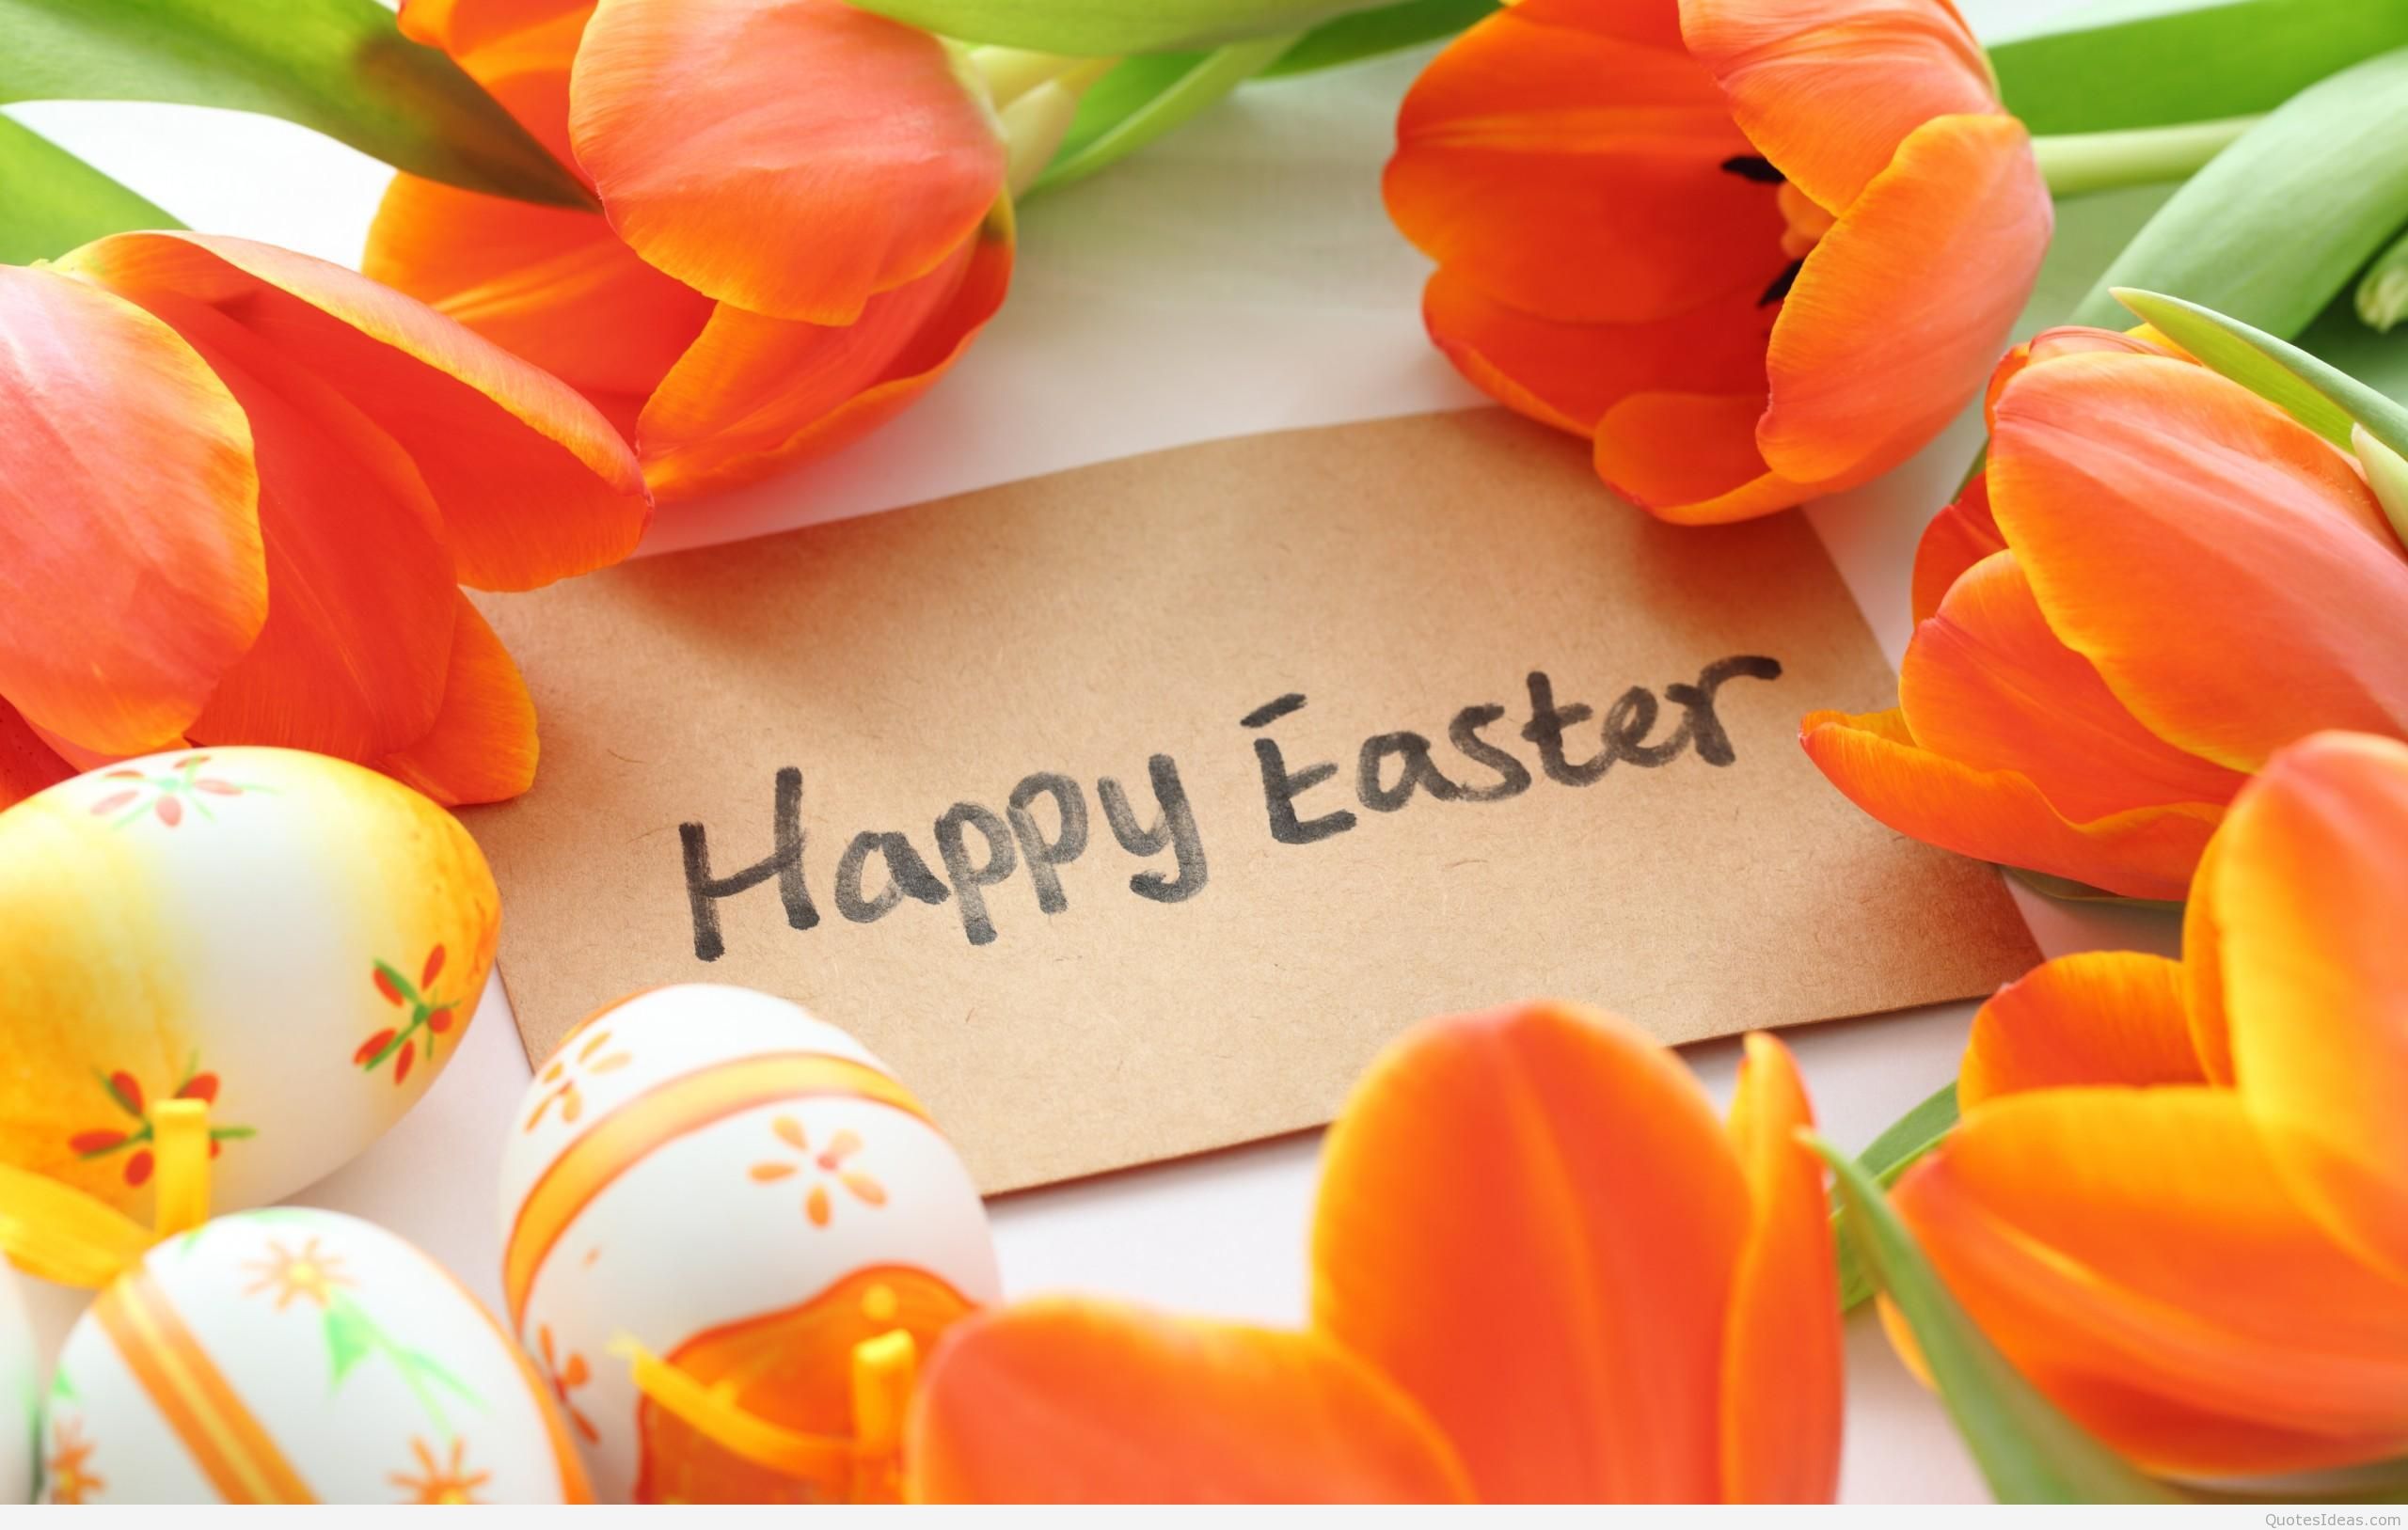 Happy Easter wallpaper and quotes 2015 2016